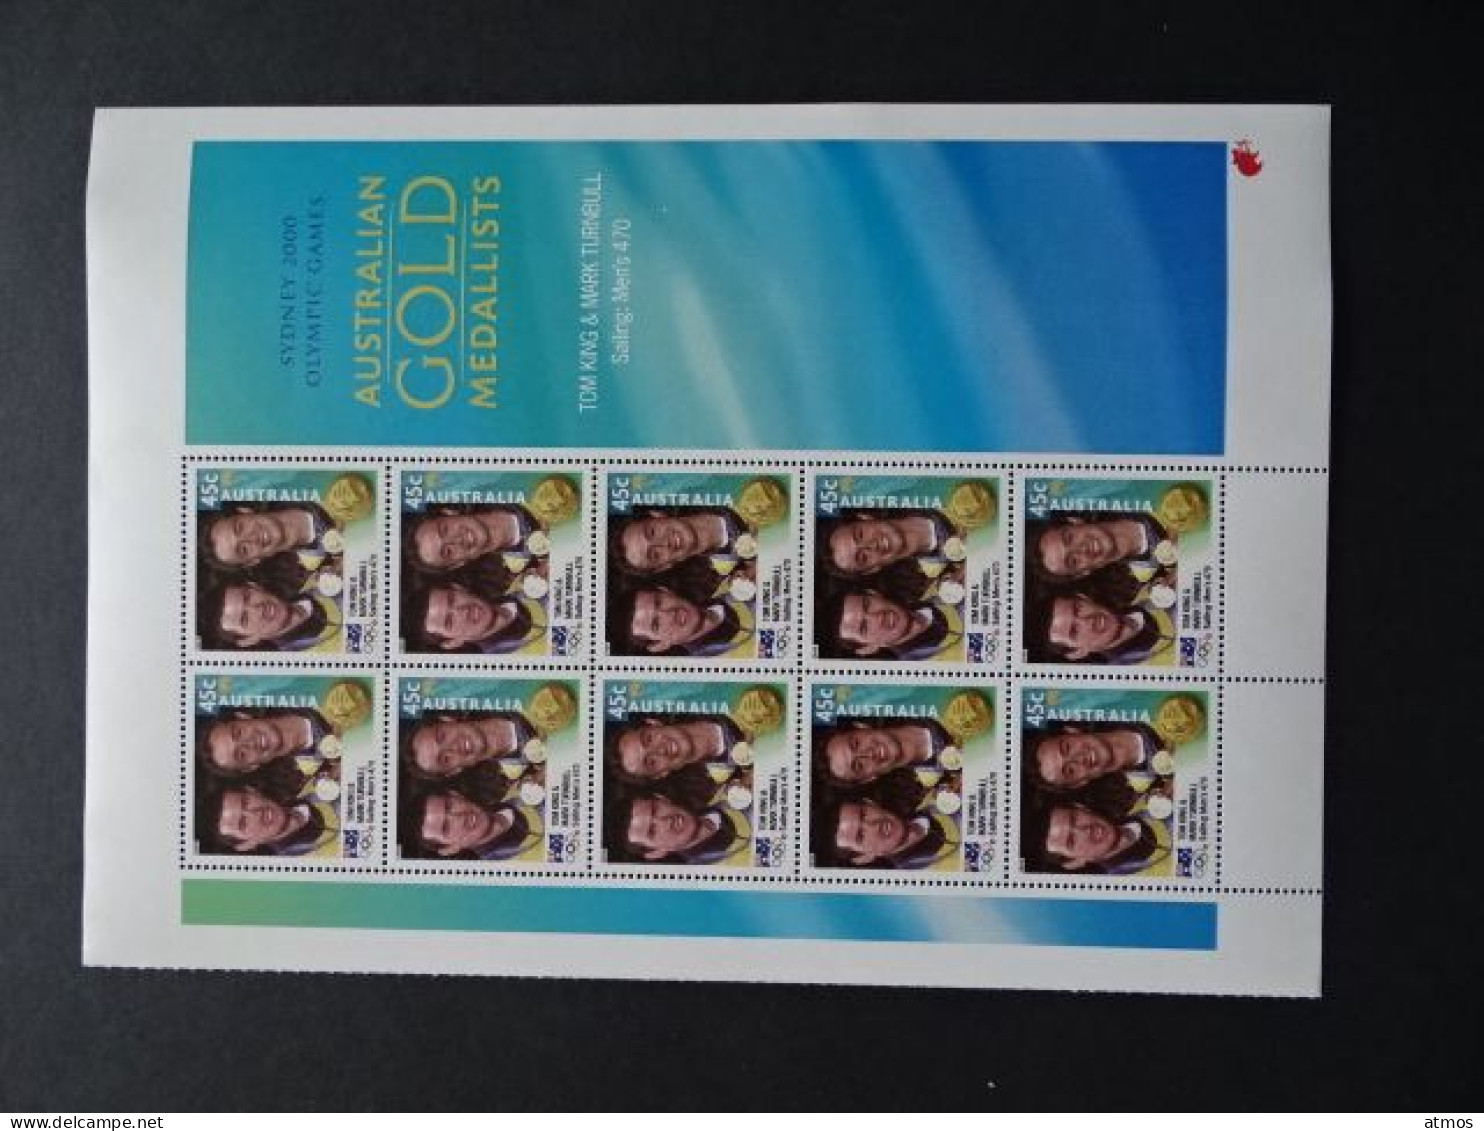 Australia MNH Michel Nr 1988 Sheet Of 10 From 2000 QLD - Mint Stamps